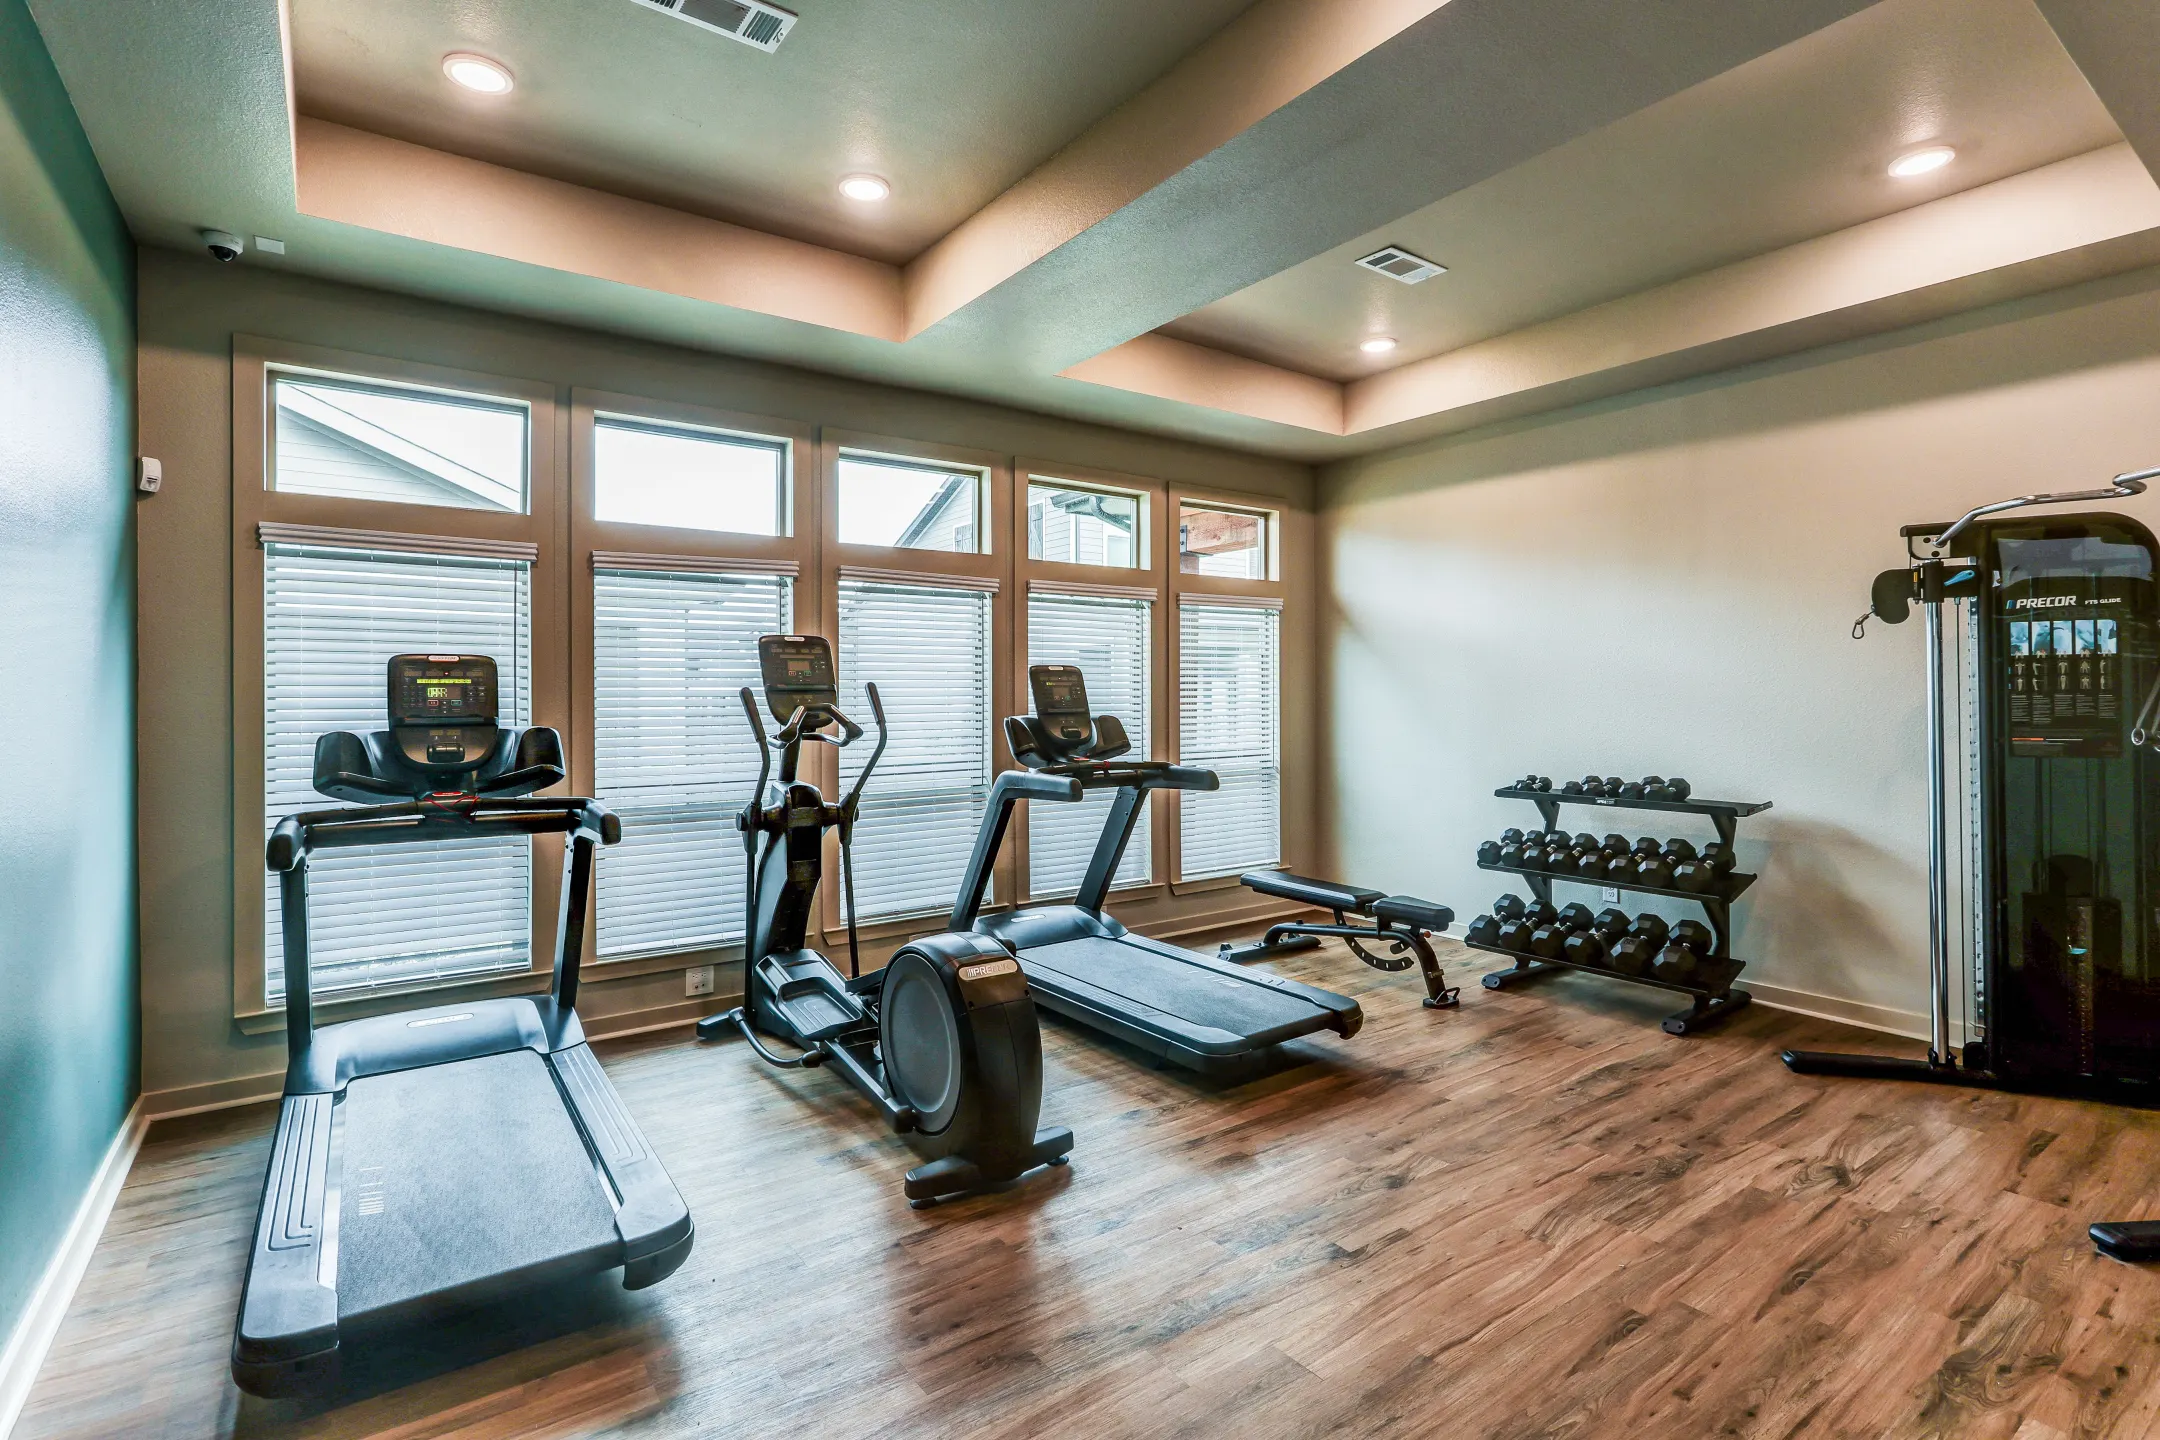 Fitness Weight Room - Home at Waller - Waller, TX